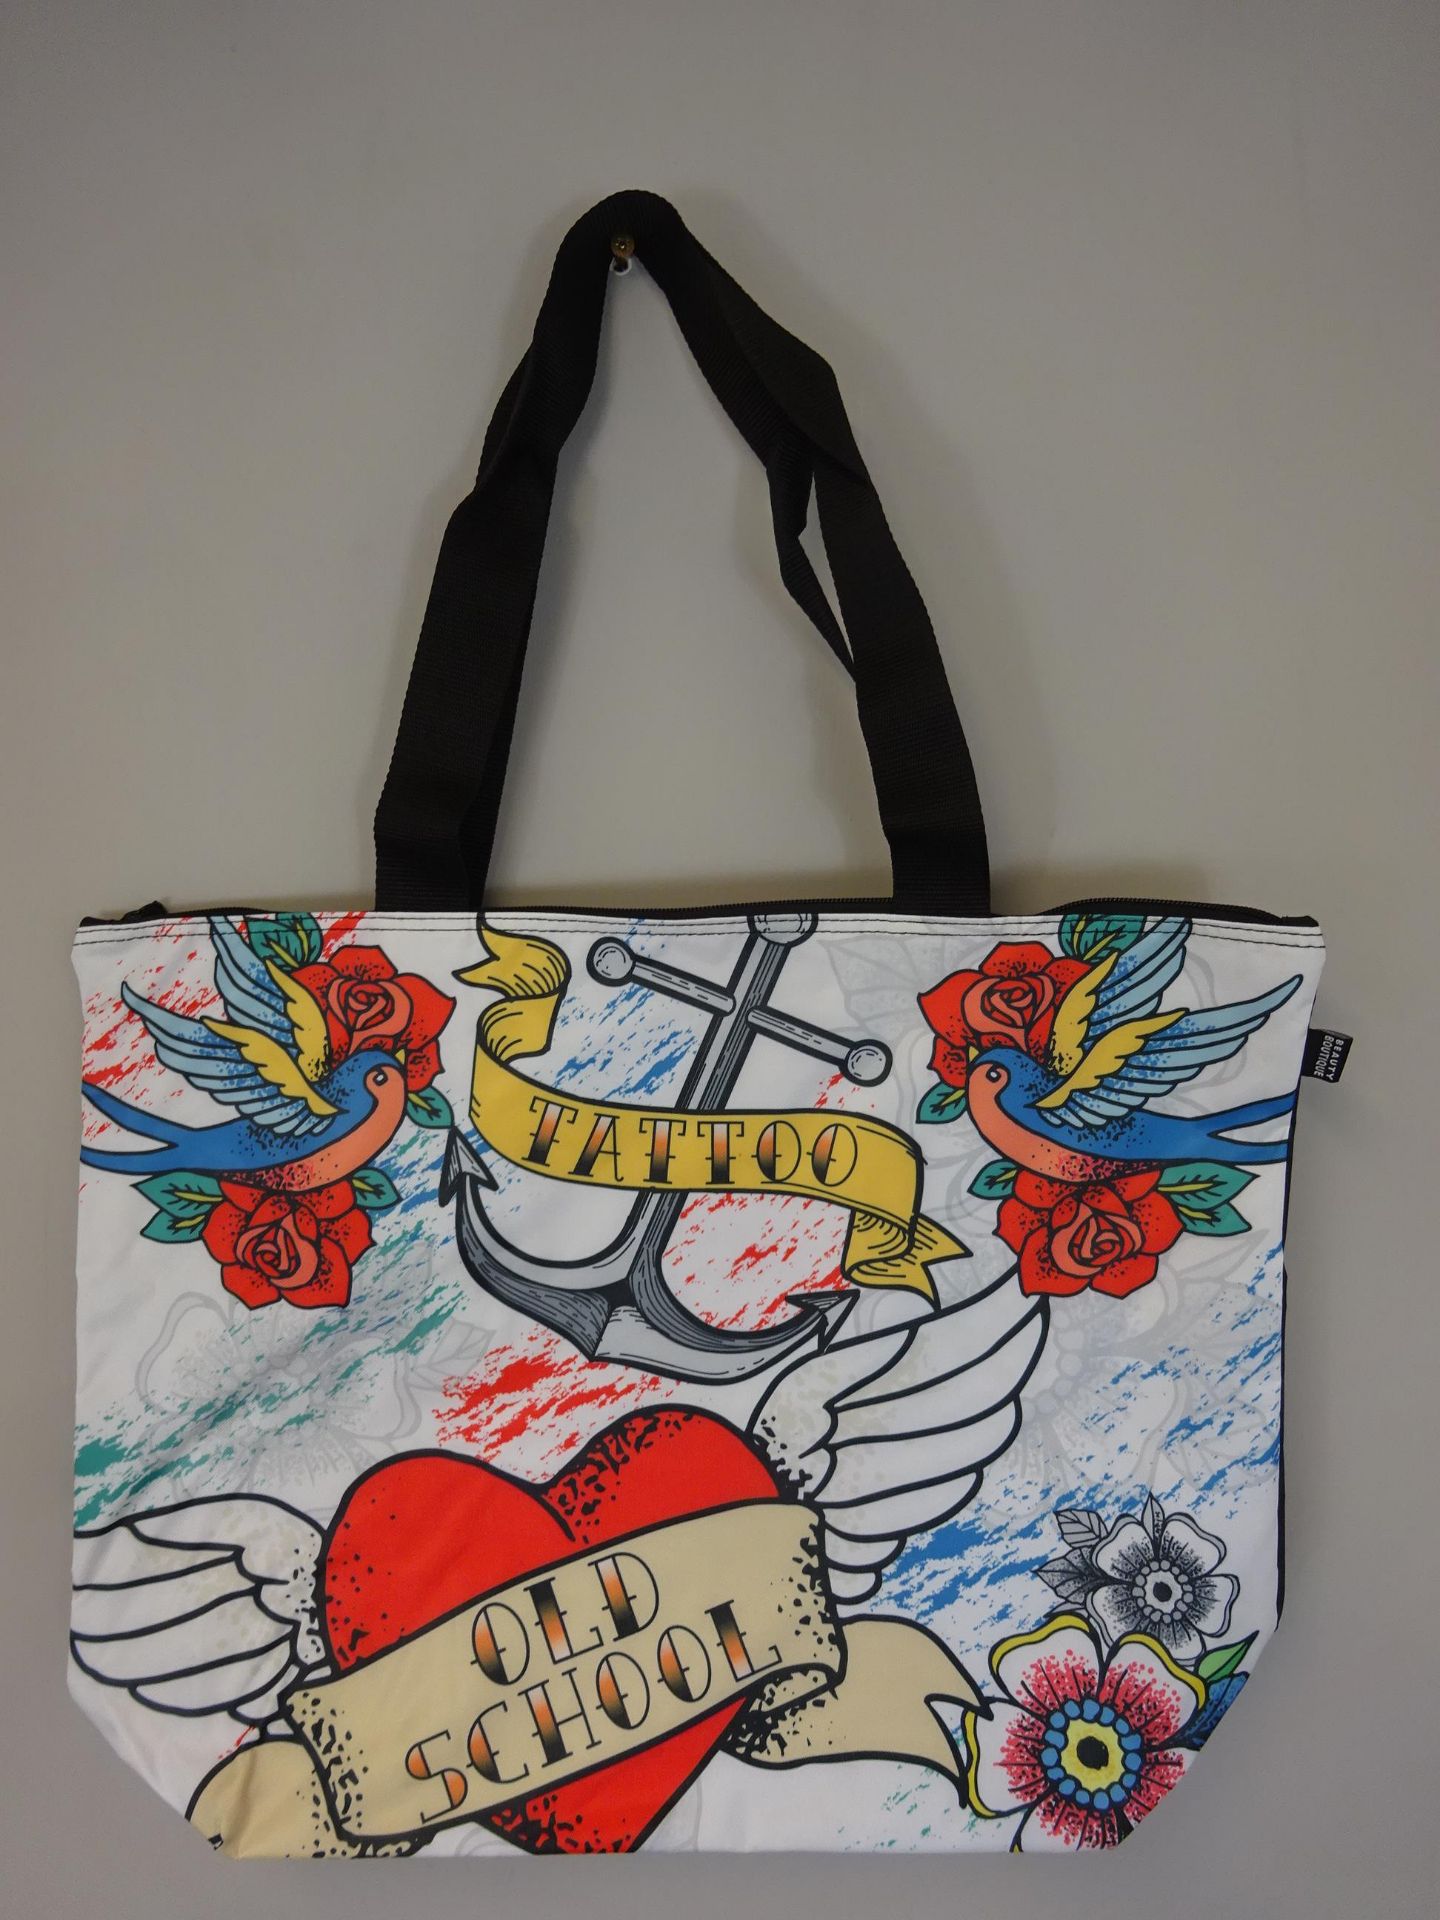 New White Tattoo Patterend Beach Bag